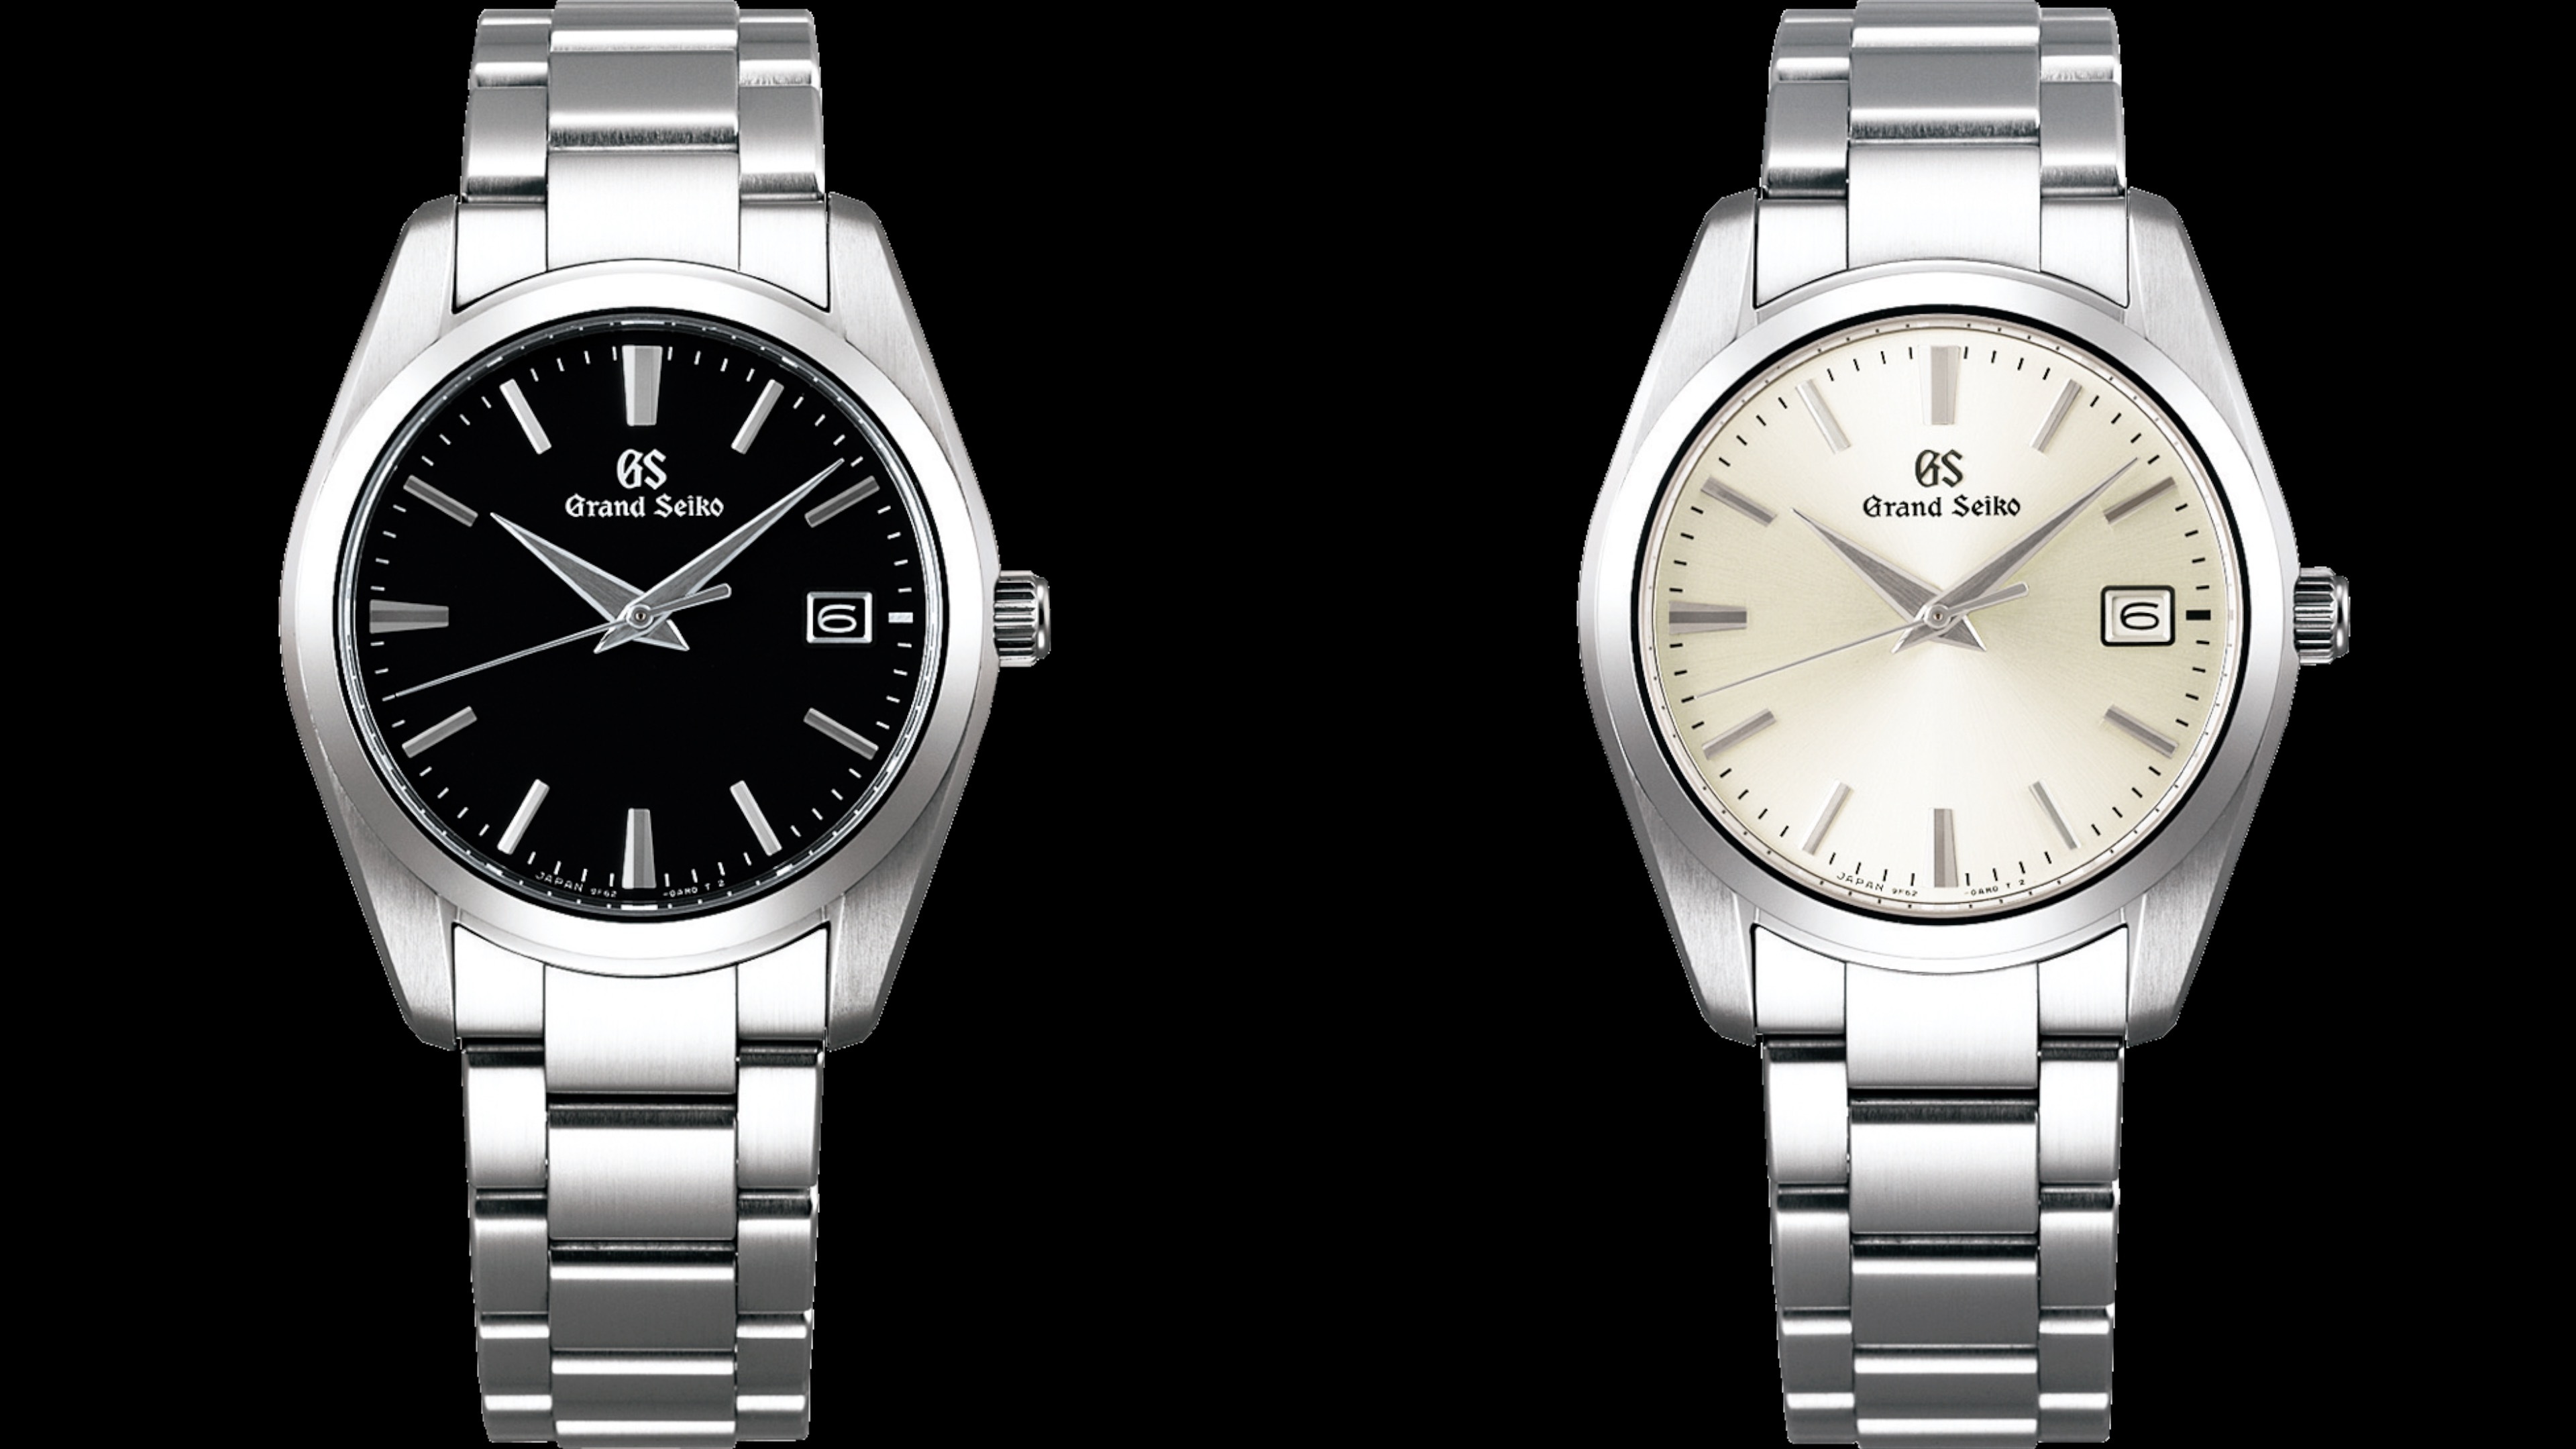 Grand Seiko's Least Expensive Watches Are the Quartz SBGX261 and 